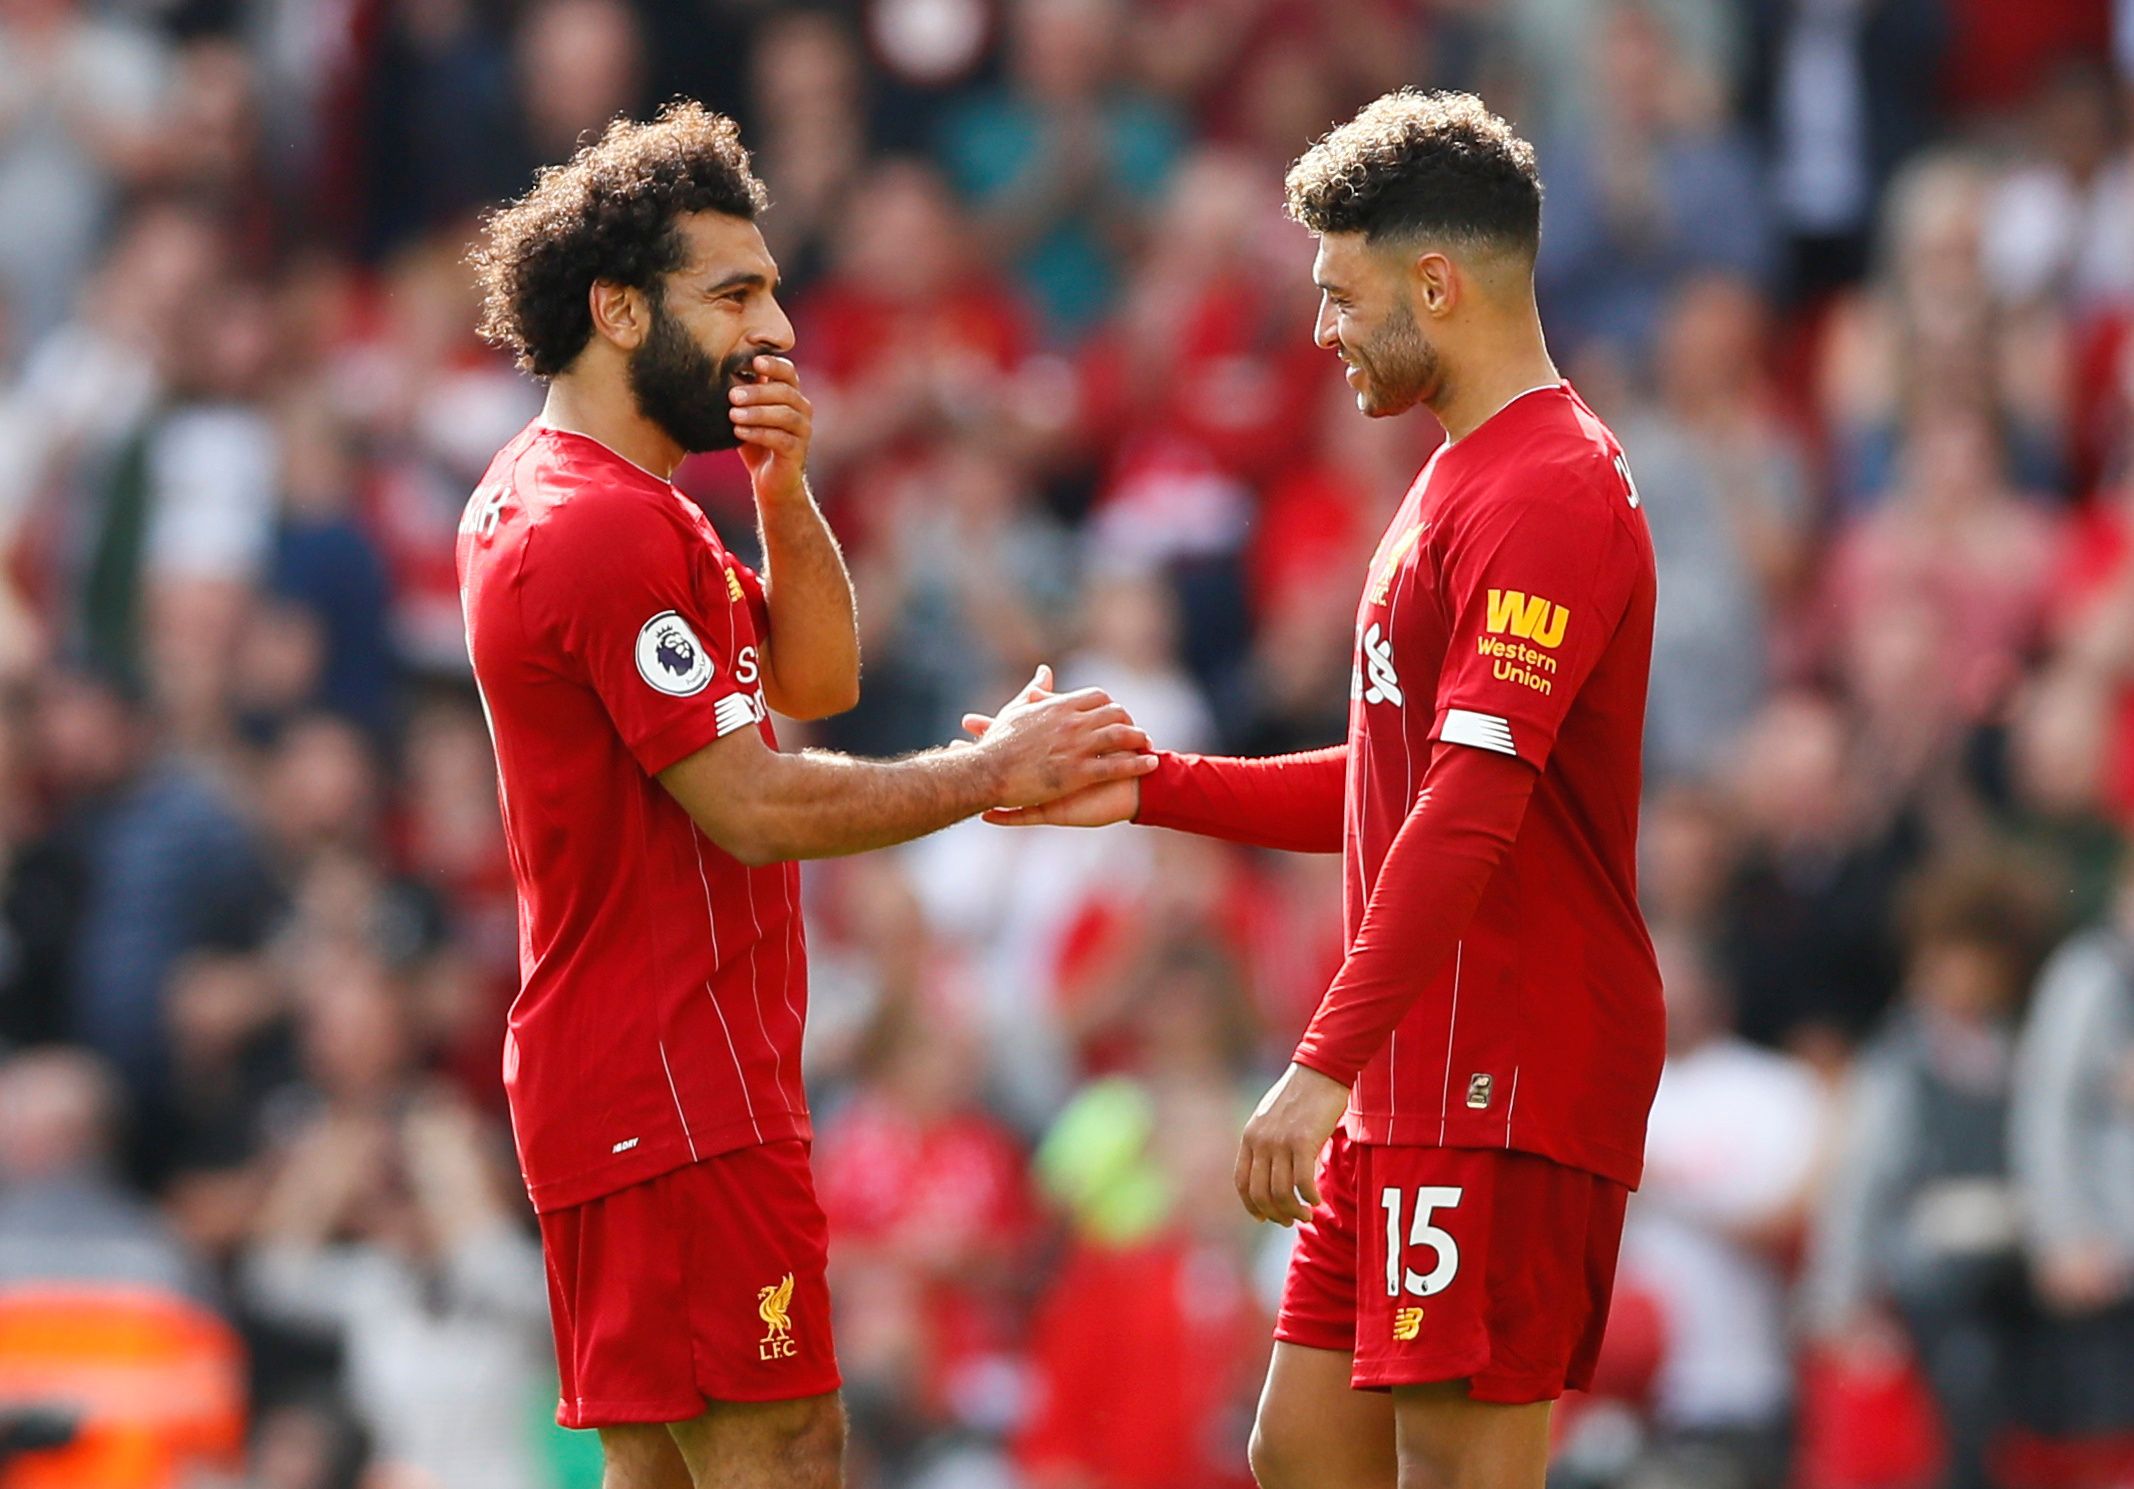 Soccer Football - Premier League - Liverpool v Newcastle United - Anfield, Liverpool, Britain - September 14, 2019  Liverpool's Mohamed Salah and Alex Oxlade-Chamberlain after the match  Action Images via Reuters/Jason Cairnduff  EDITORIAL USE ONLY. No use with unauthorized audio, video, data, fixture lists, club/league logos or 